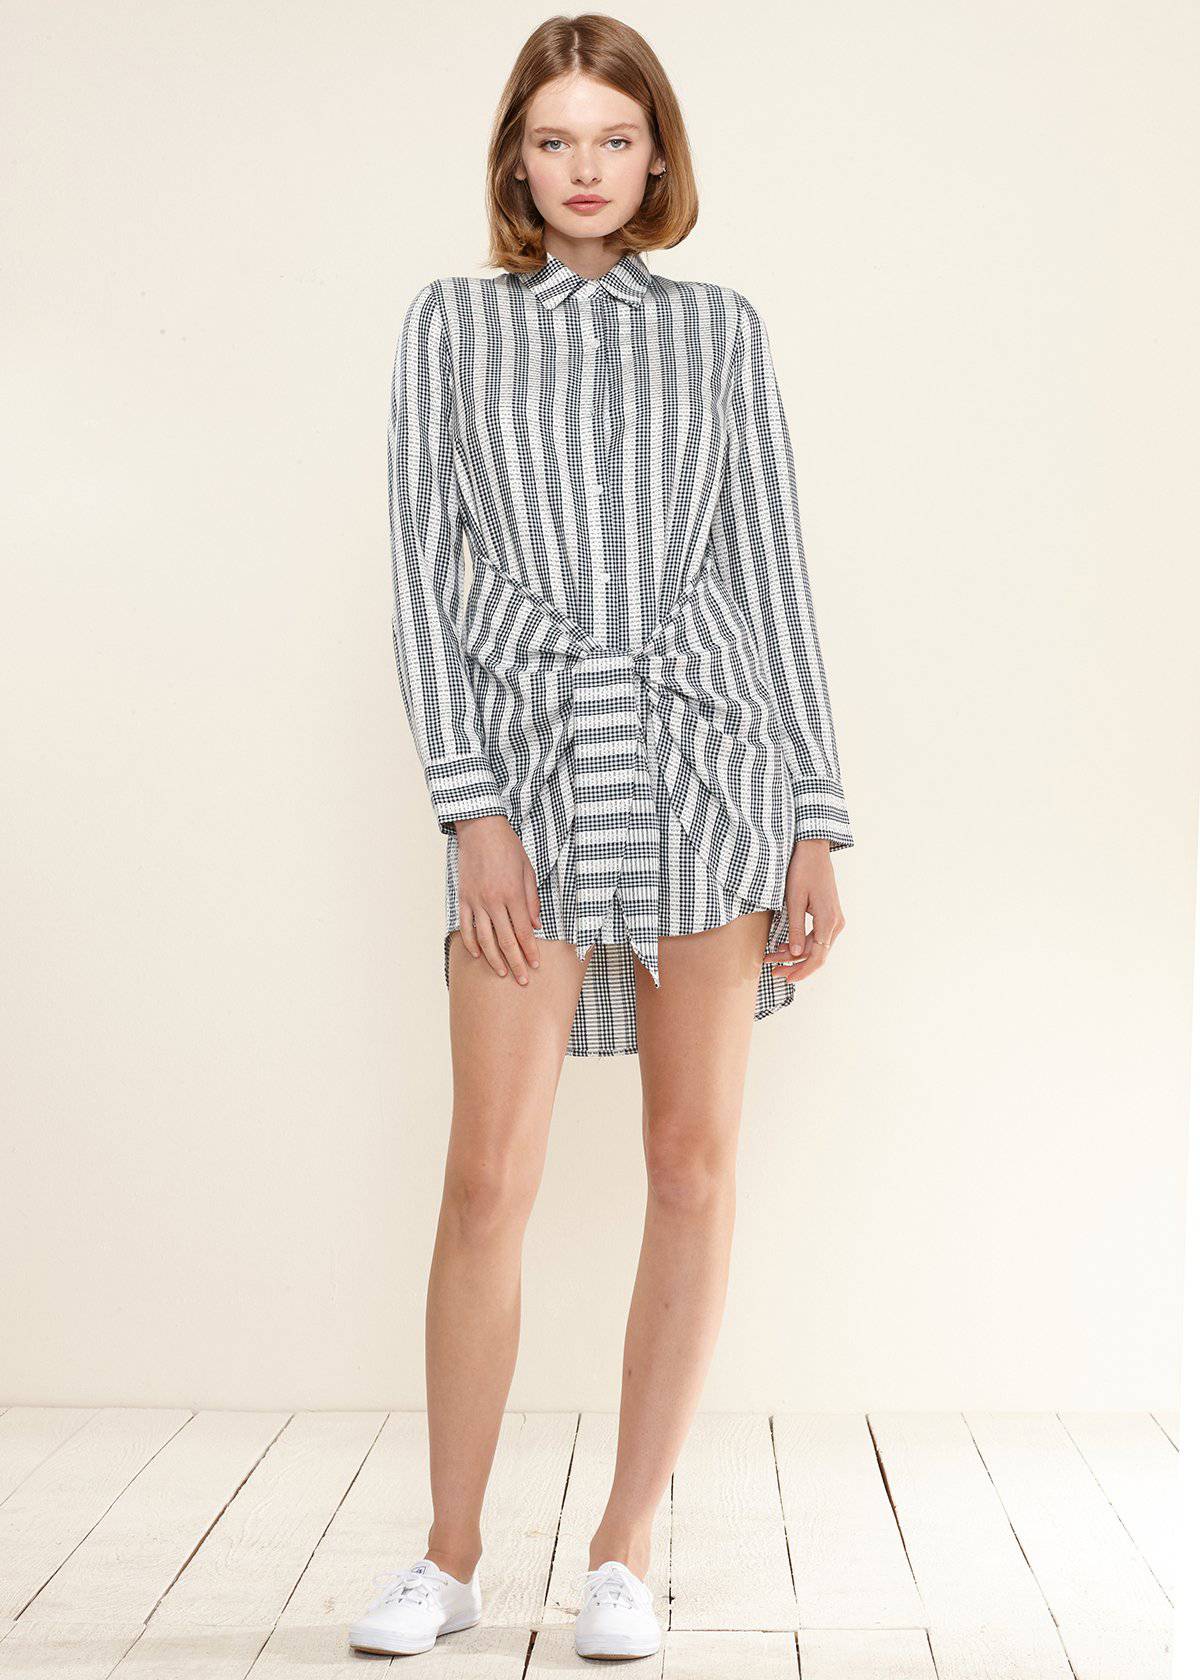 Women's Lace Trim Wrapped Shirt Dress in Ditsy Gingham by Shop at Konus